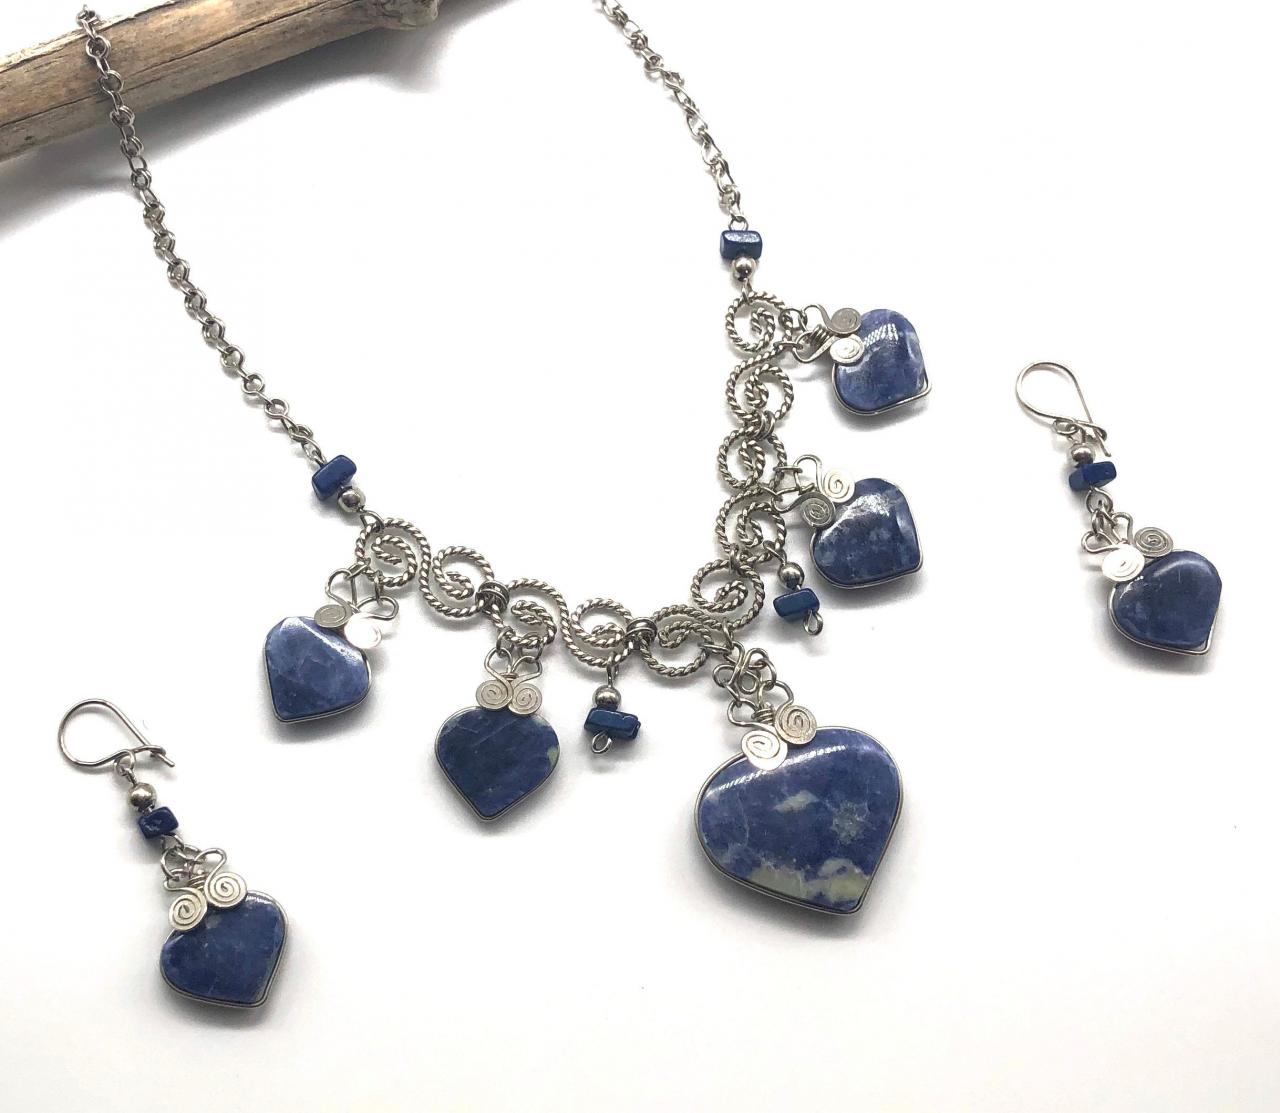 ! Sodalite Necklace And Earrings,heart Shape Necklace, Handmade Necklace, Romantic Necklace, Eco Friendly Necklace, Filigree Necklace